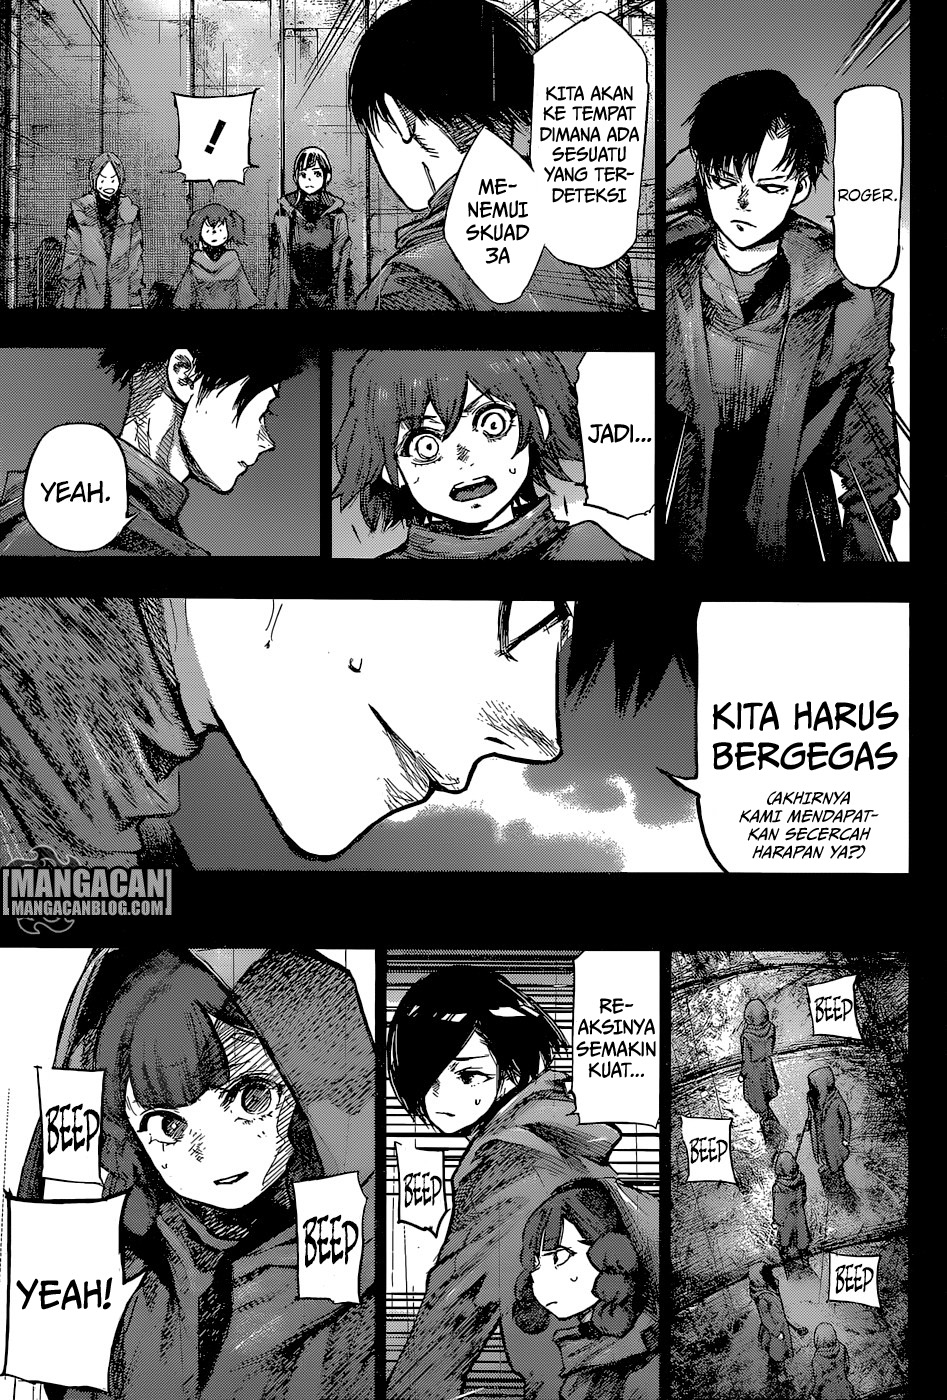 Tokyo Ghoul:re Chapter 152